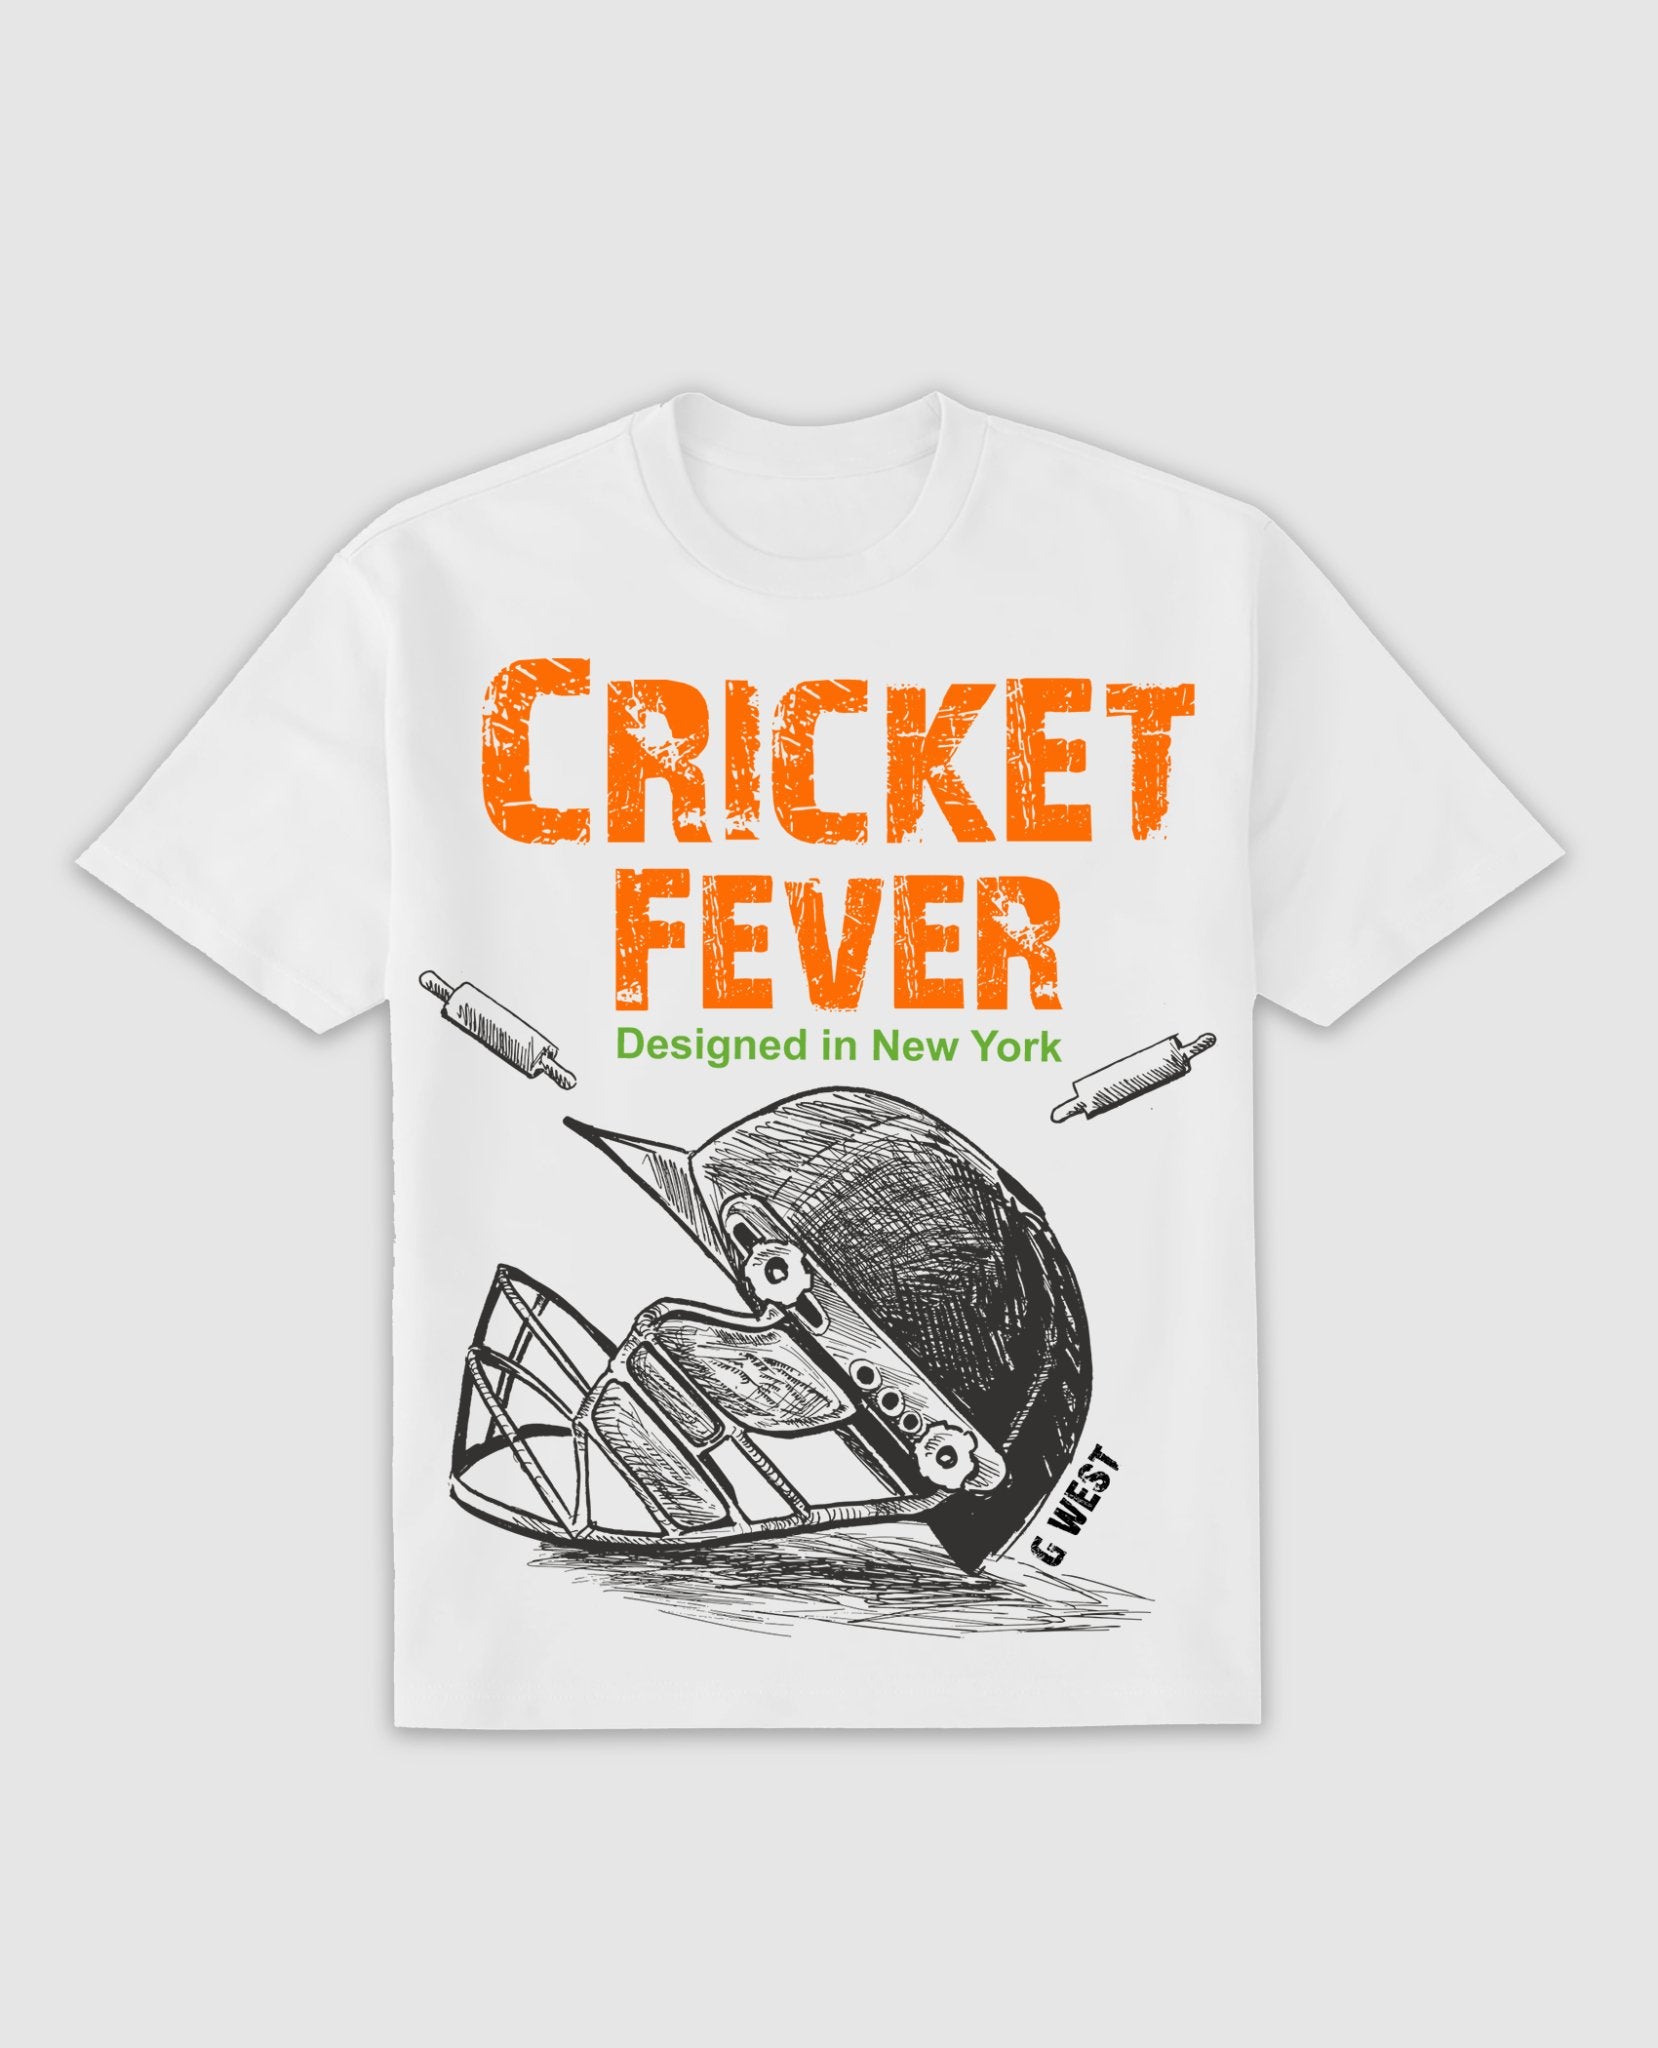 G West Cricket Fever T-Shirt: GWDTBAS2406 - 2 COLORS - G West